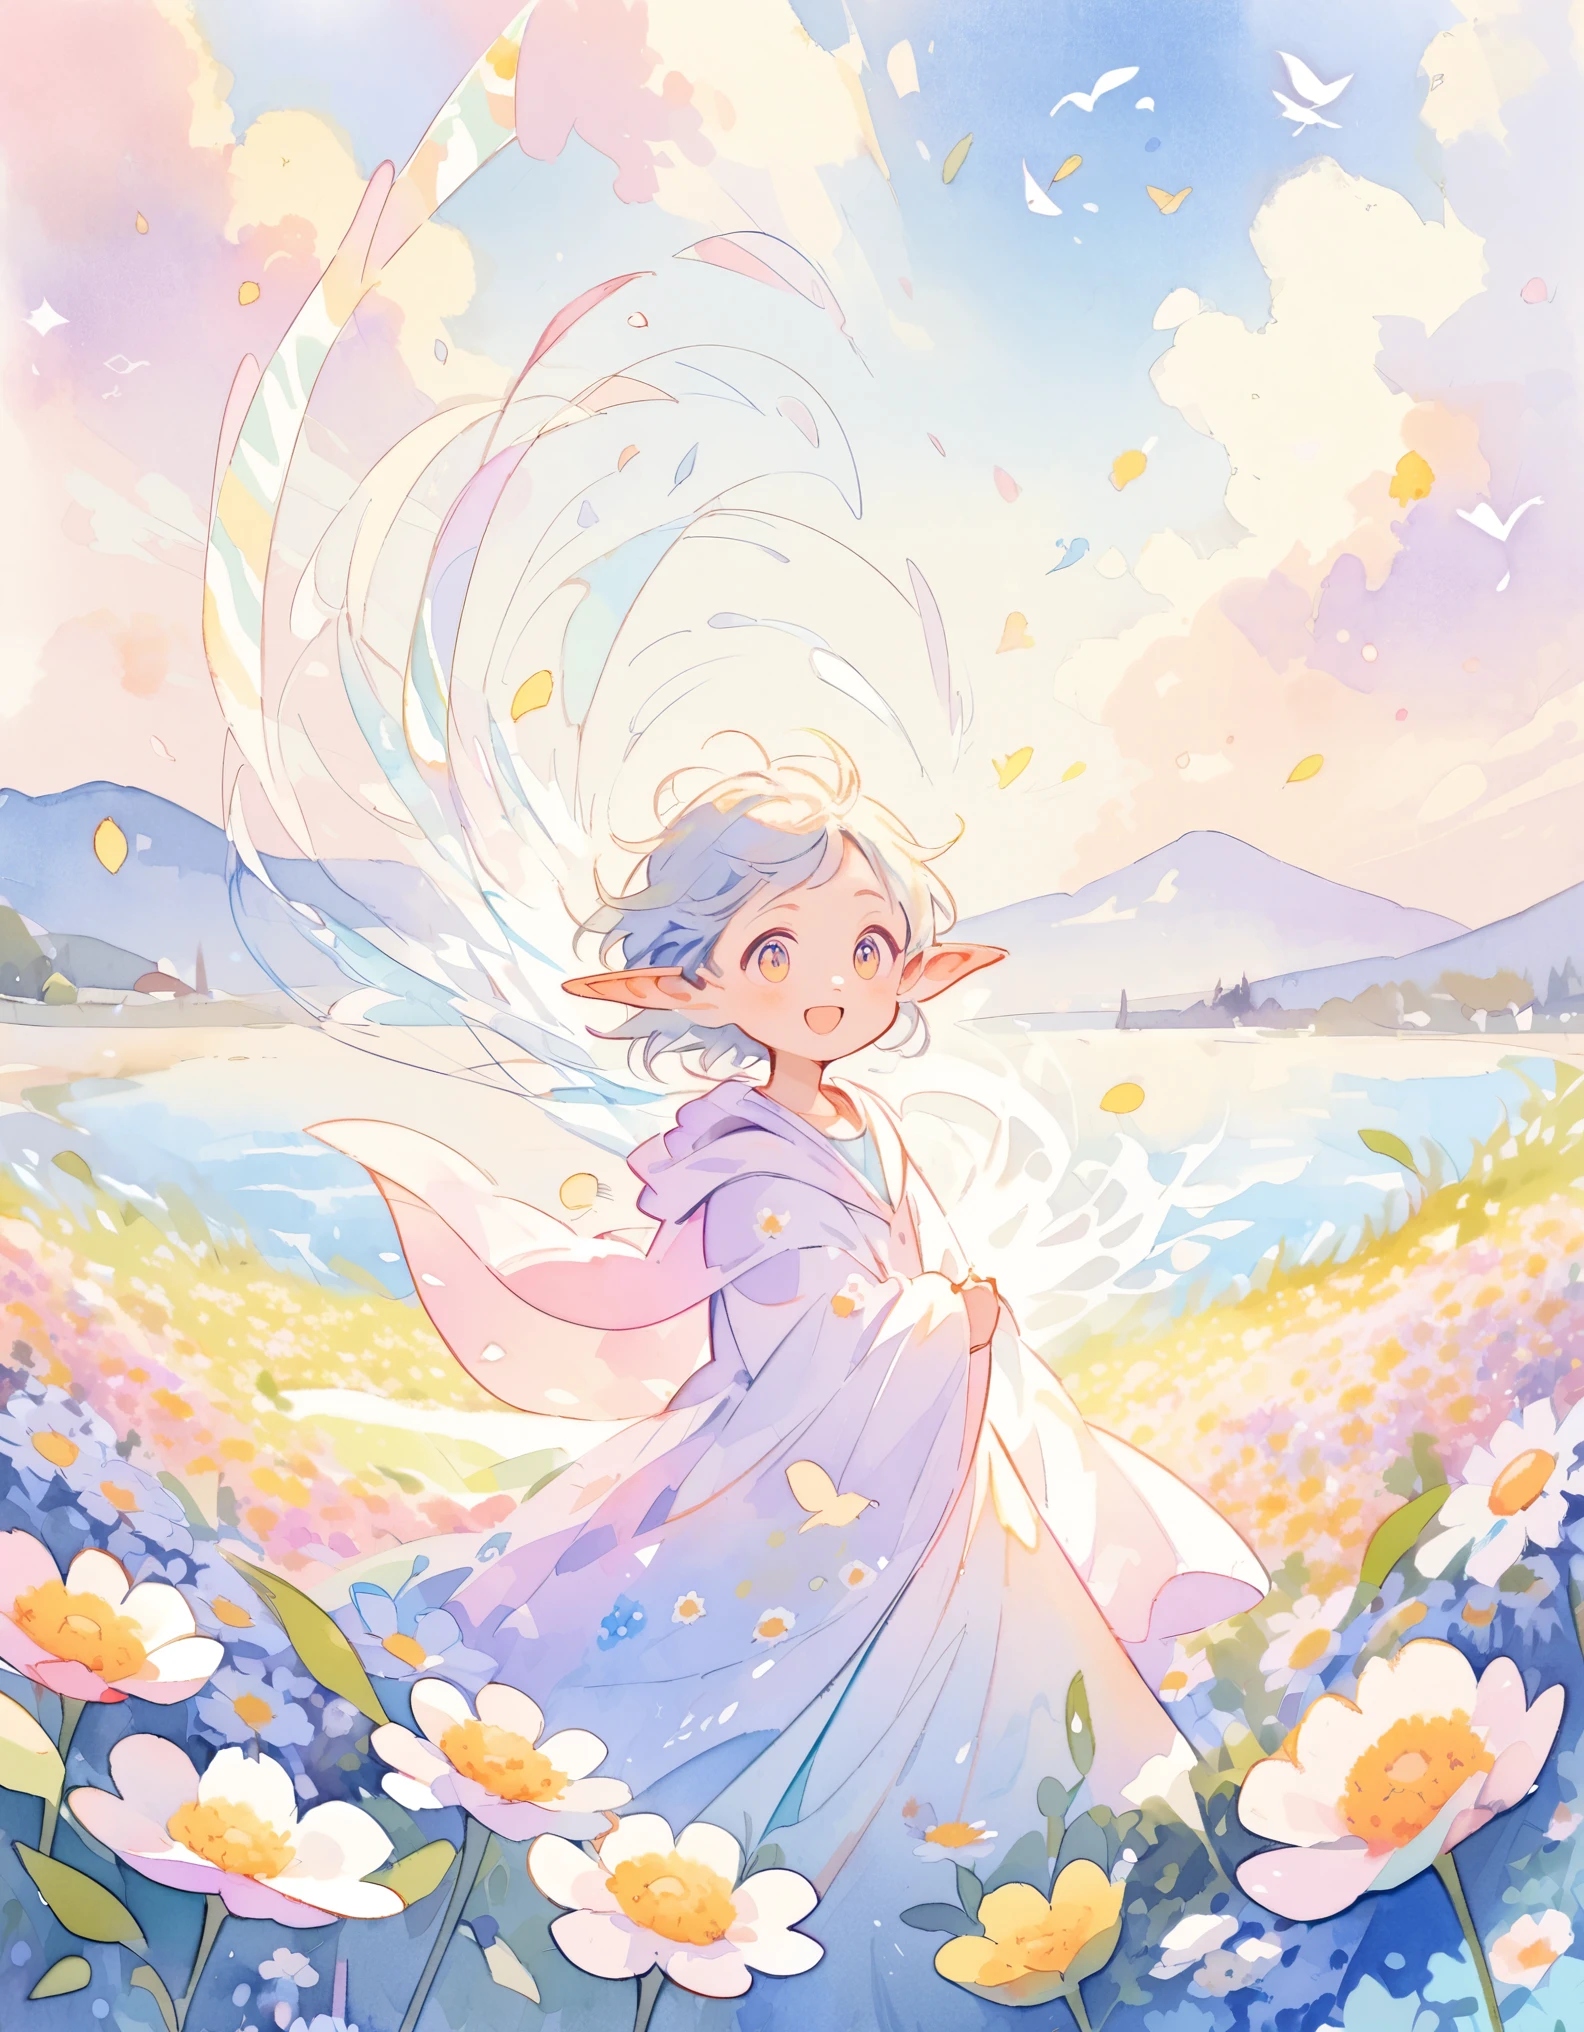 Elf Boy, Pointy Ears, Magic Robe, Expressions of joy, Magic Wind, natural environment, ((Flower Field, pastel colour)), Lakeside, Watercolor. Whimsical and delicate style, Illustrations for children, Children&#39;s book illustrations, masterpiece:1.2,